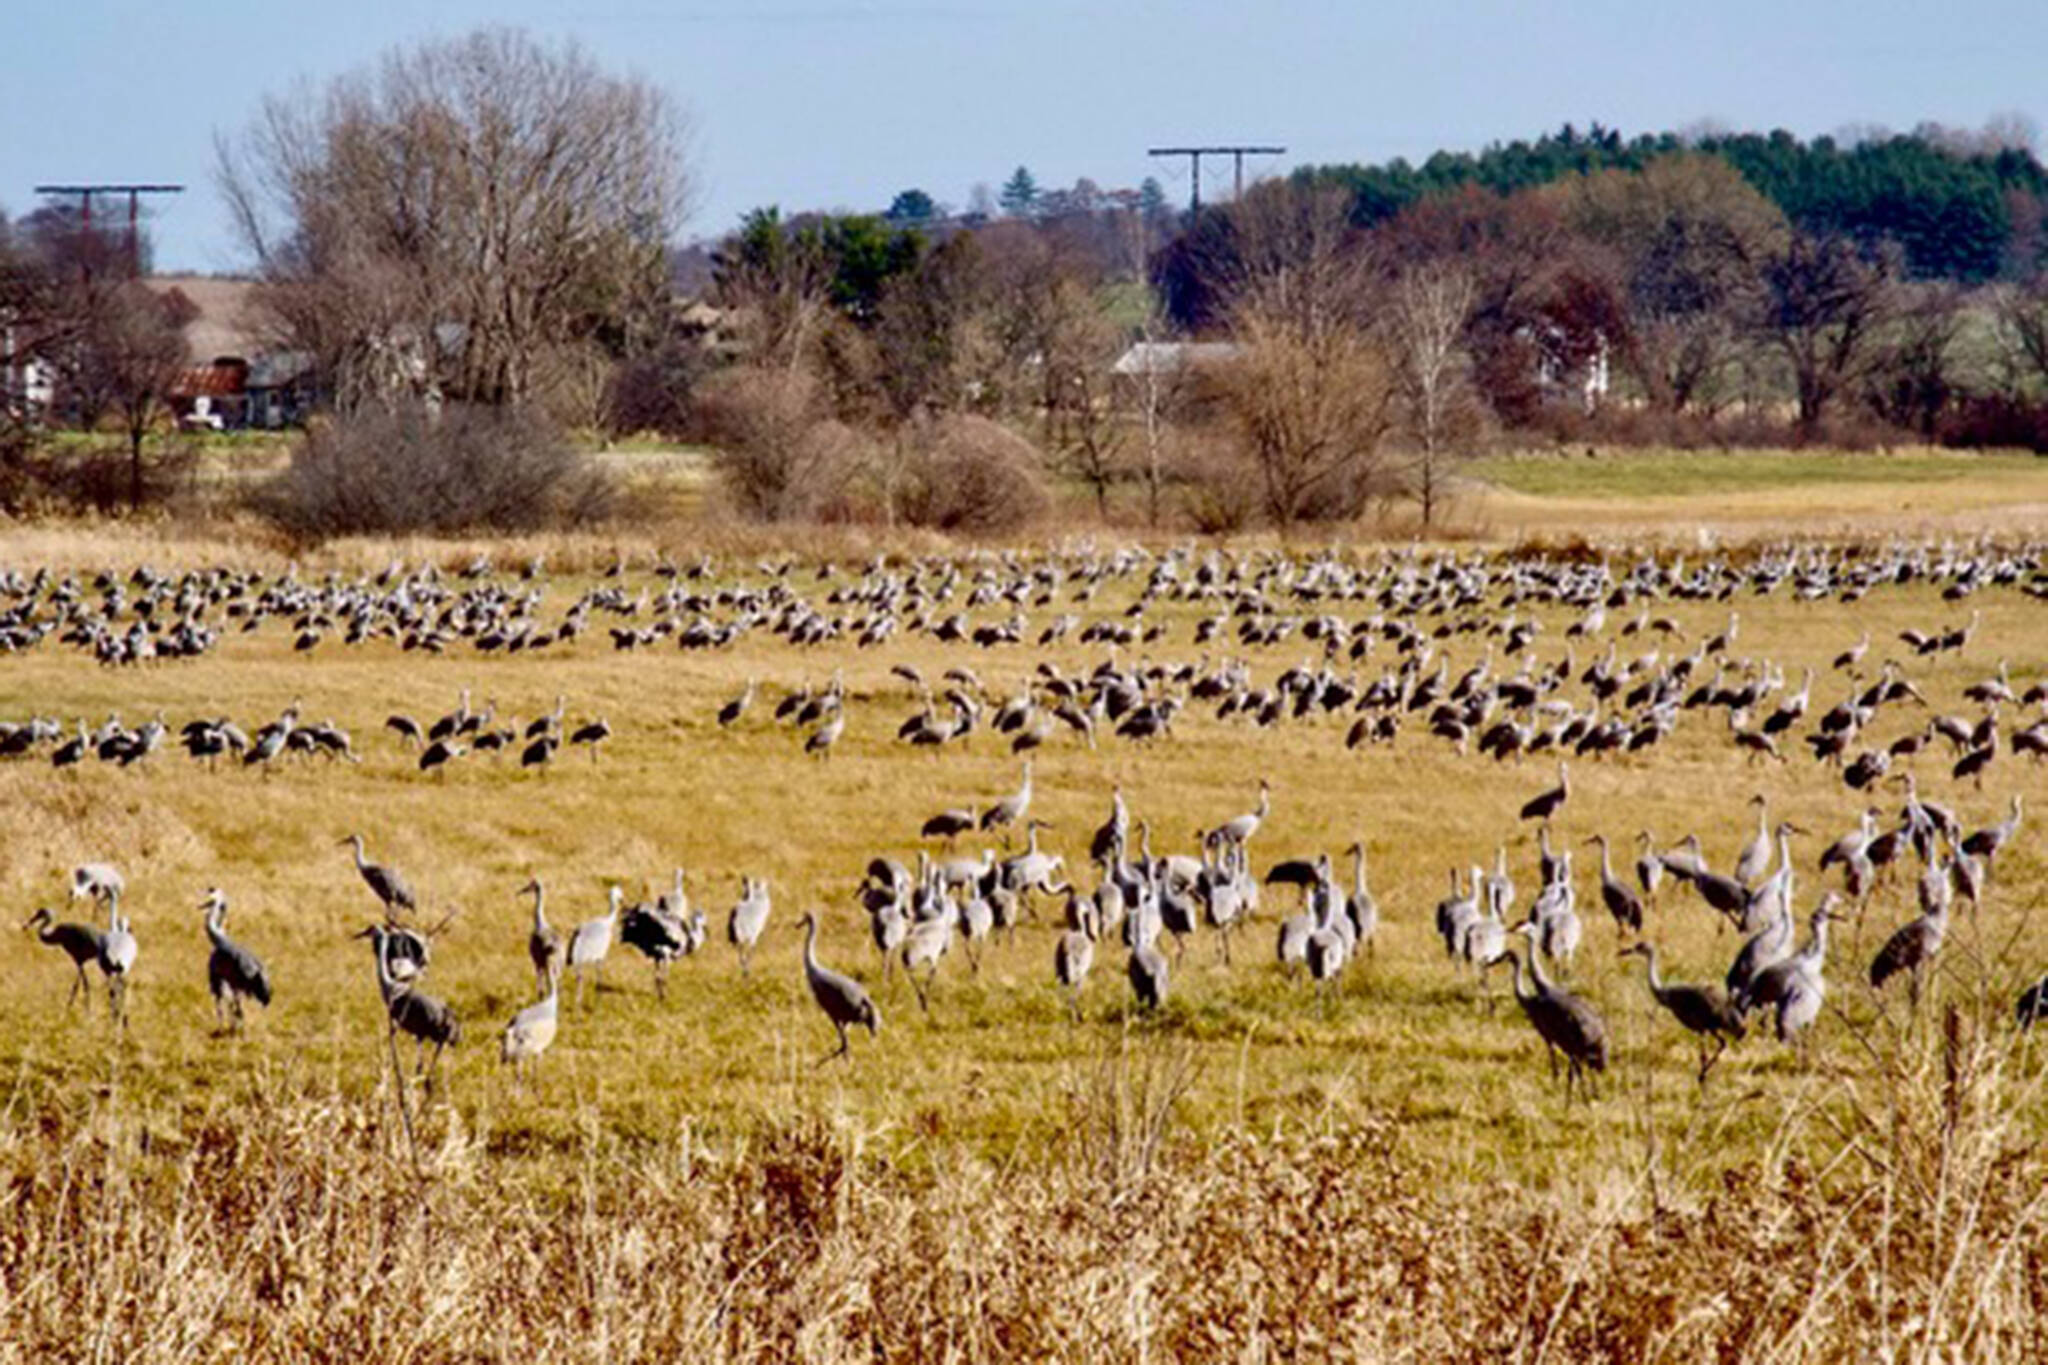 This photo shows sandhill cranes in a Southern Wisconsin field. "It’s always a big treat to see them," writes Mary F. Willson. (Courtesy Photo / J.S. Willson)